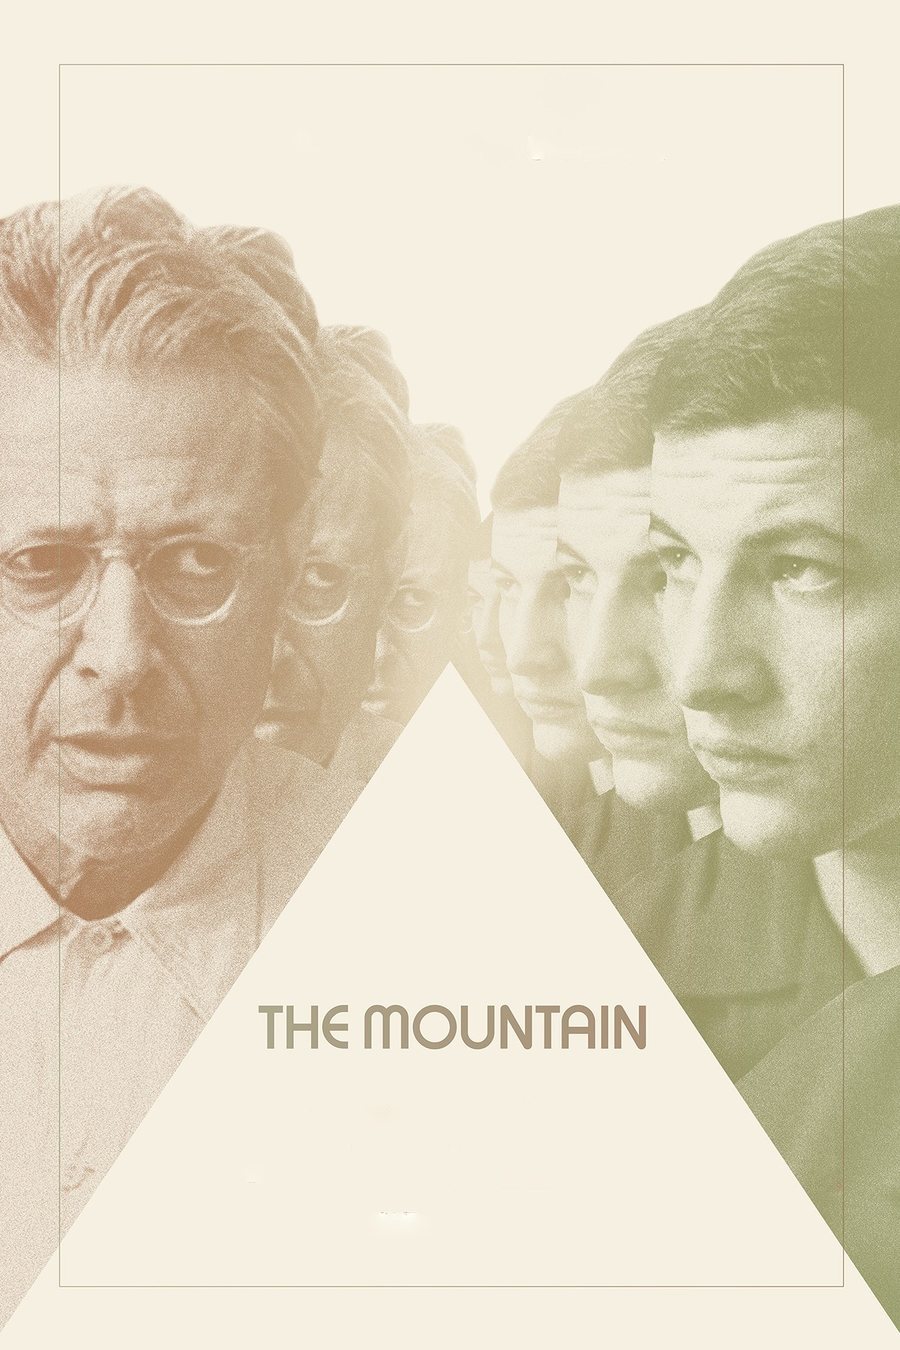 Poster of The Mountain - The mountain